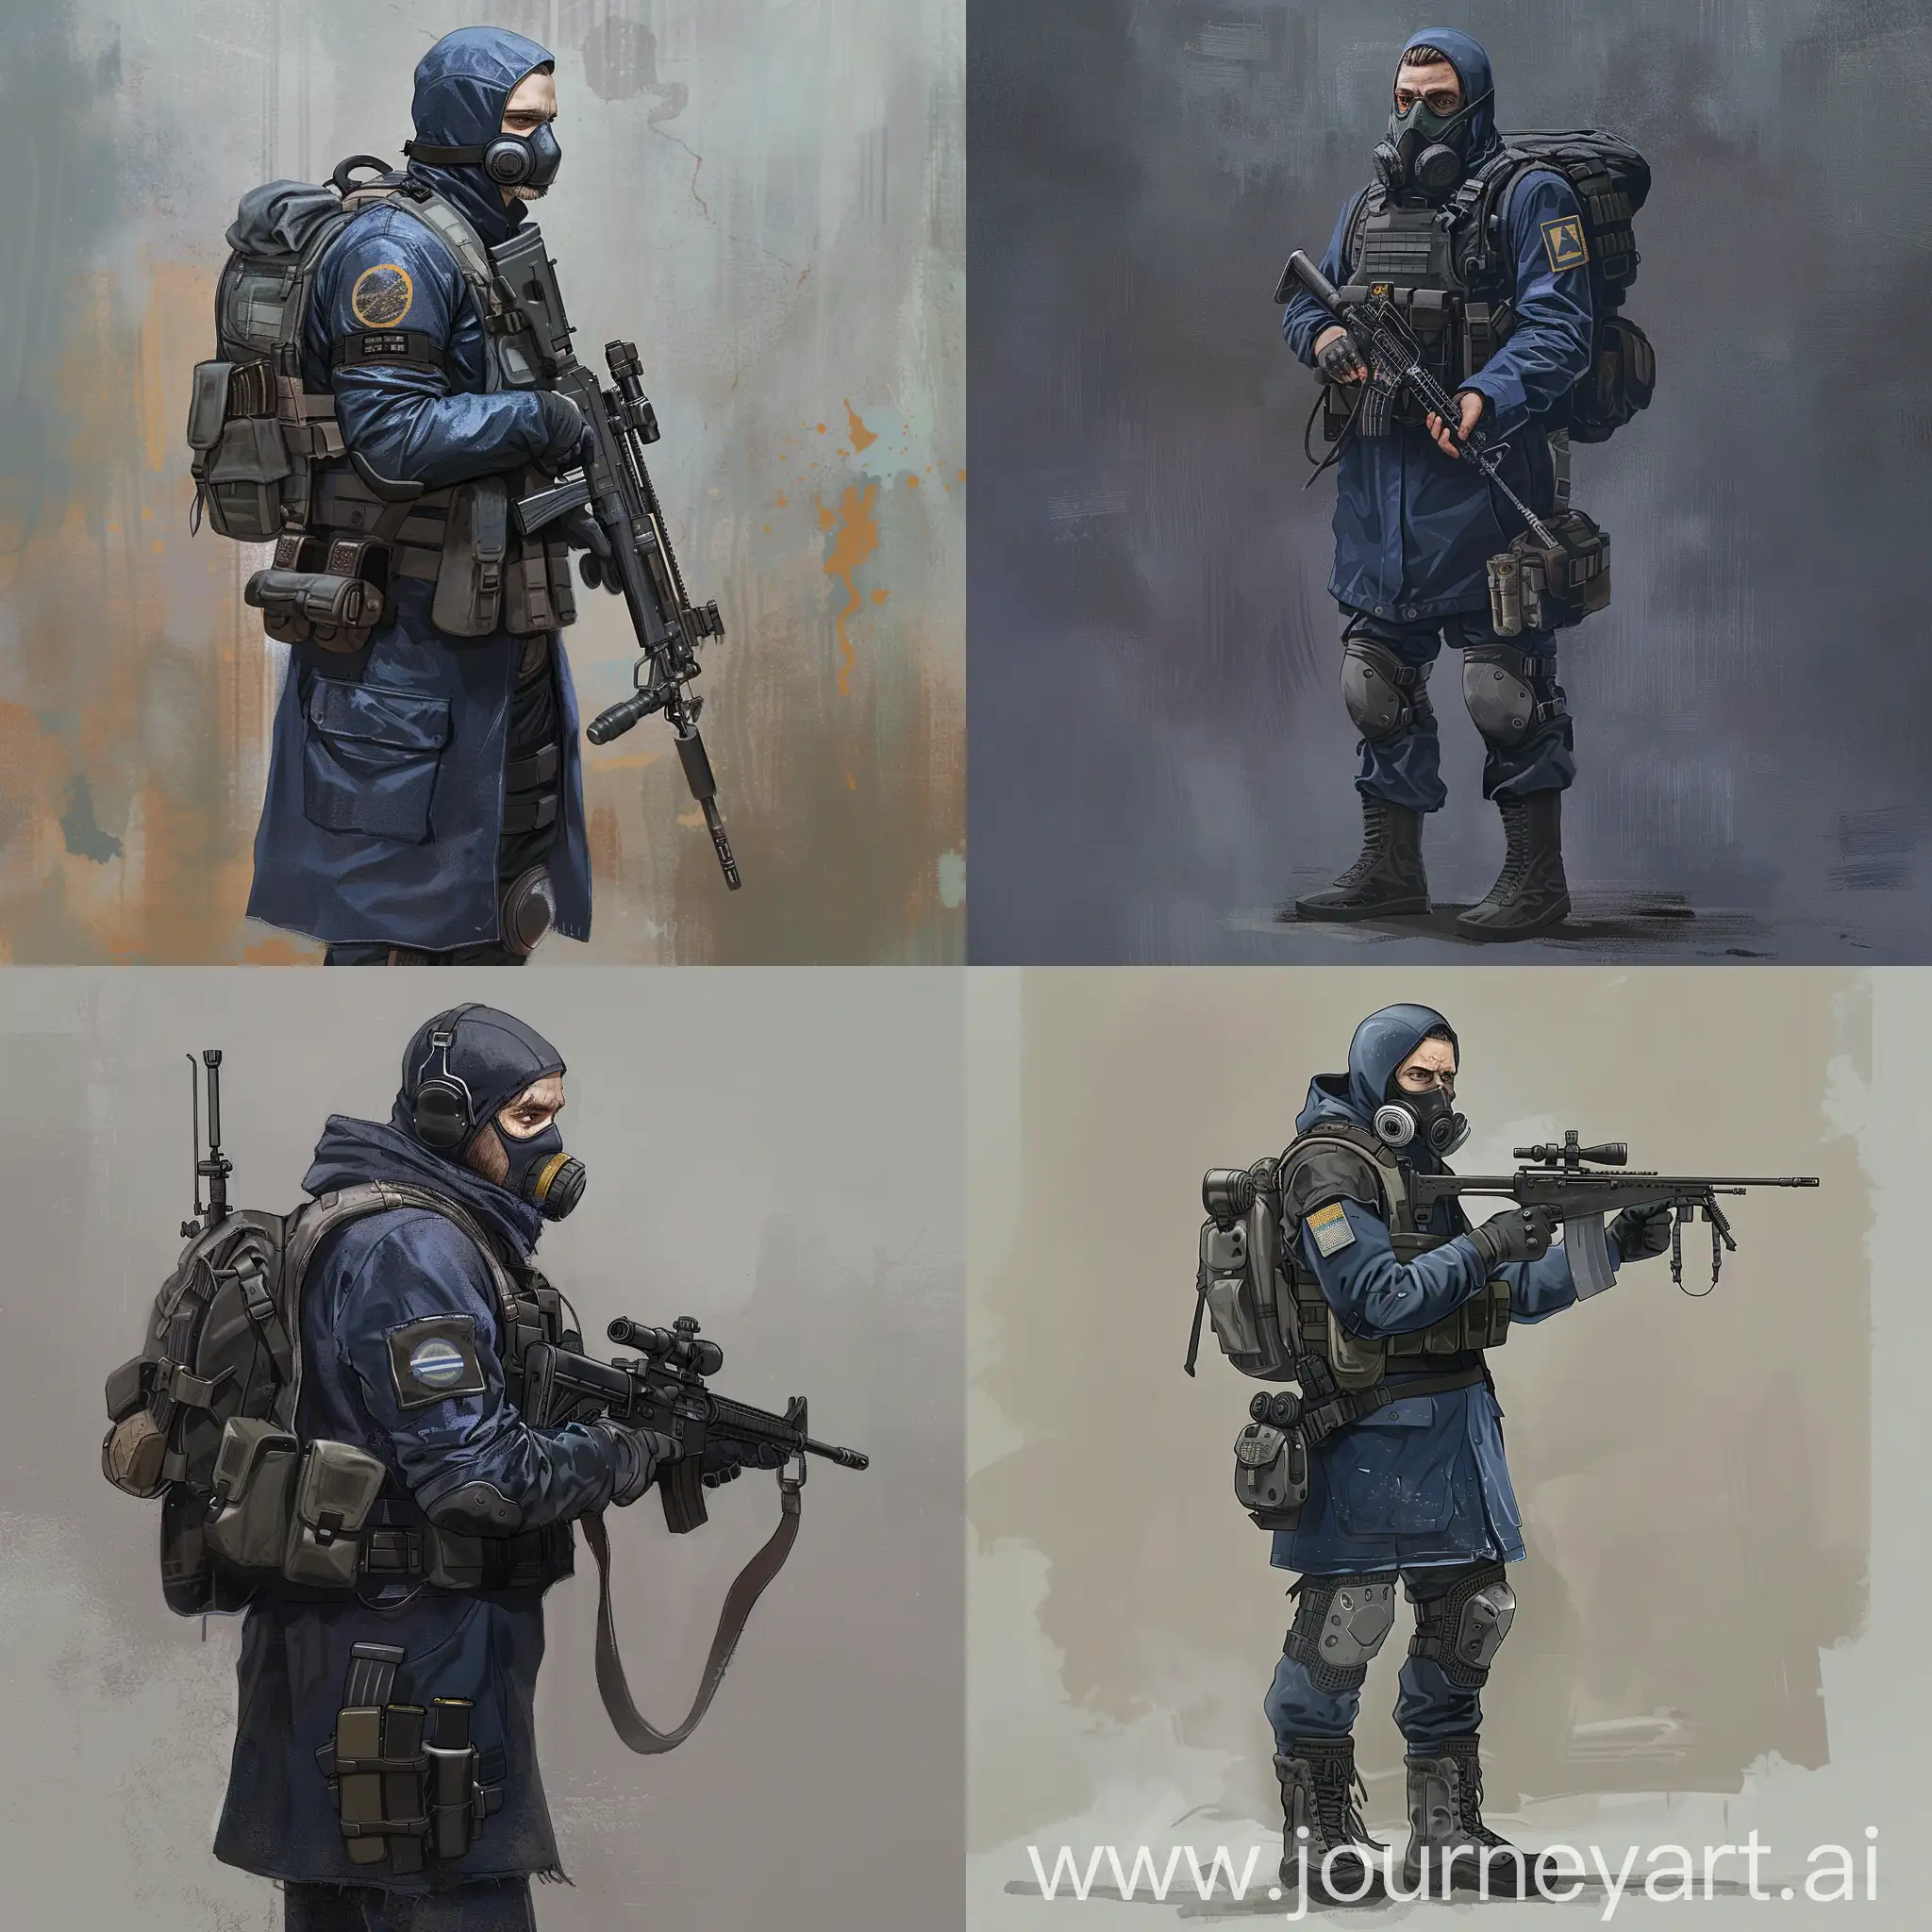 Concept art a mercenary from the universe of S.T.A.L.K.E.R., a mercenary dressed in a dark blue military raincoat, gray military armor on his body, a gas mask on his face, a small military backpack on his back, sniper rifle in his hands.